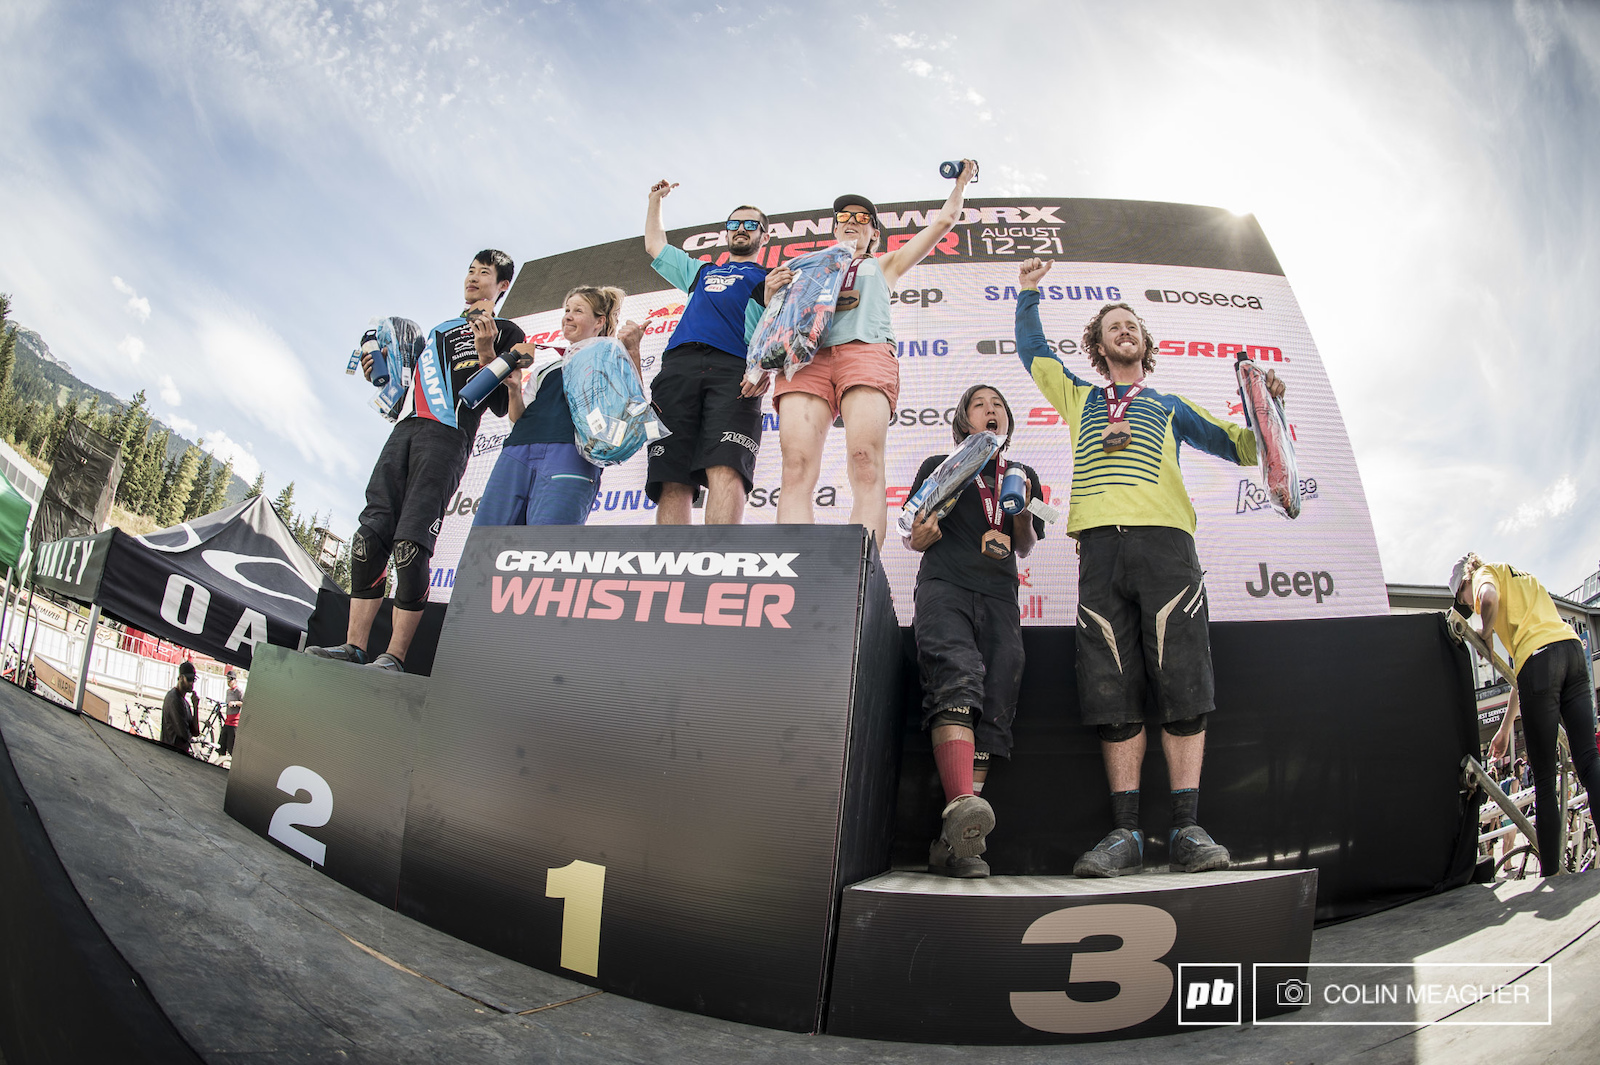 Men's and Women's shared the podium on the Challenger Enduro; left to right: Shend Shan Chiang and Emma Wareham (2), Shannon Hewetson and Camille Balanche (1), Michelle Chang and Tom Doran (3).